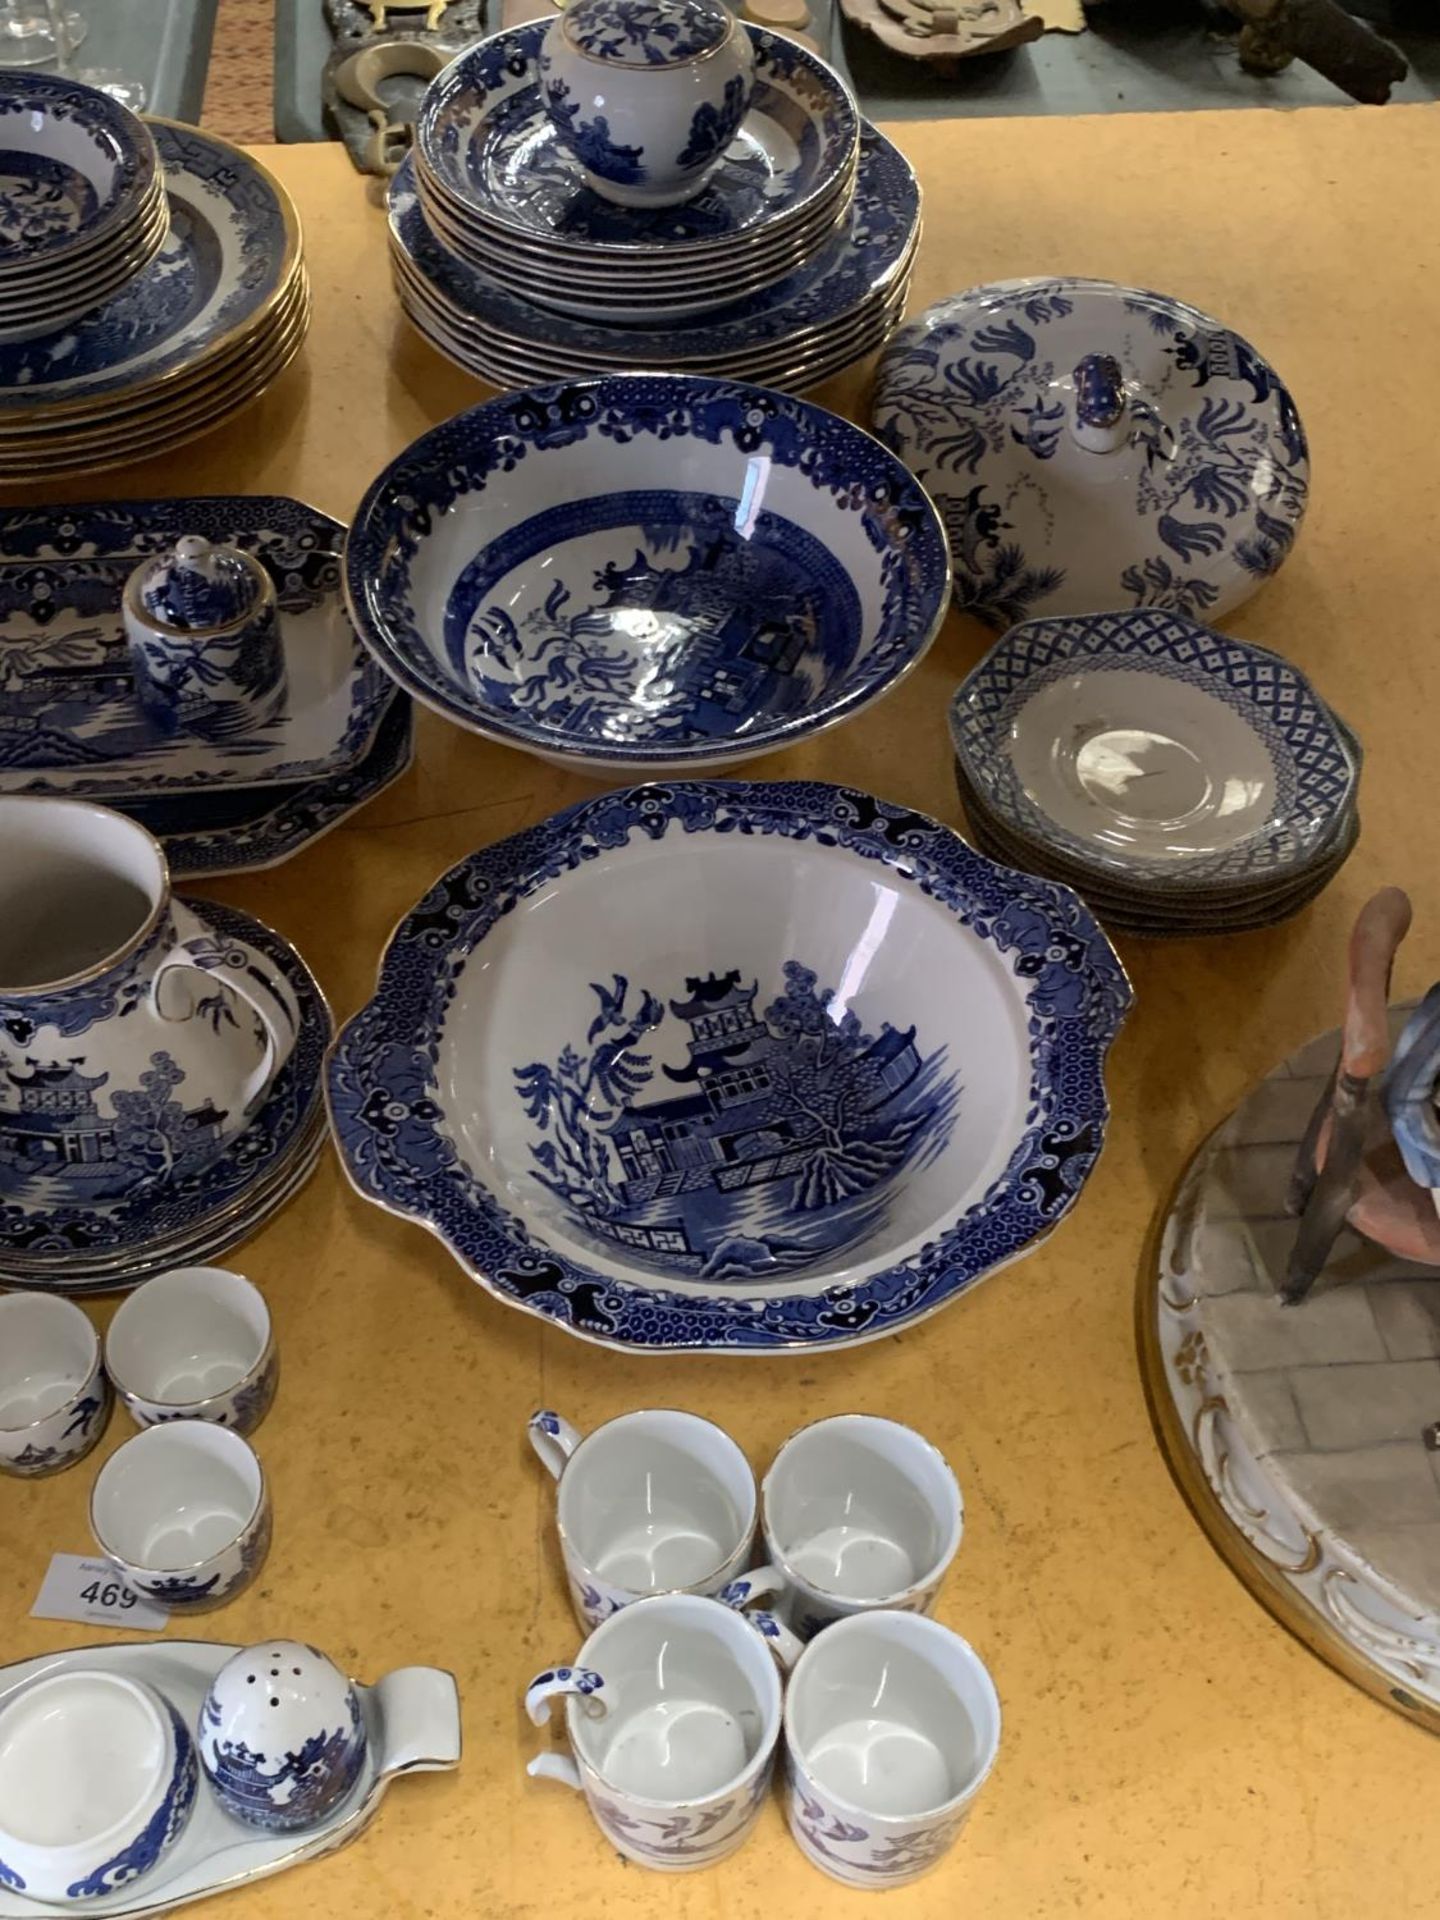 A LARGE PART BURLEIGHWARE 'WILLOW PATTERN' DINNER SERVICE TO INCLUDE VARIOUS SIZES OF PLATES, BOWLS, - Image 4 of 4